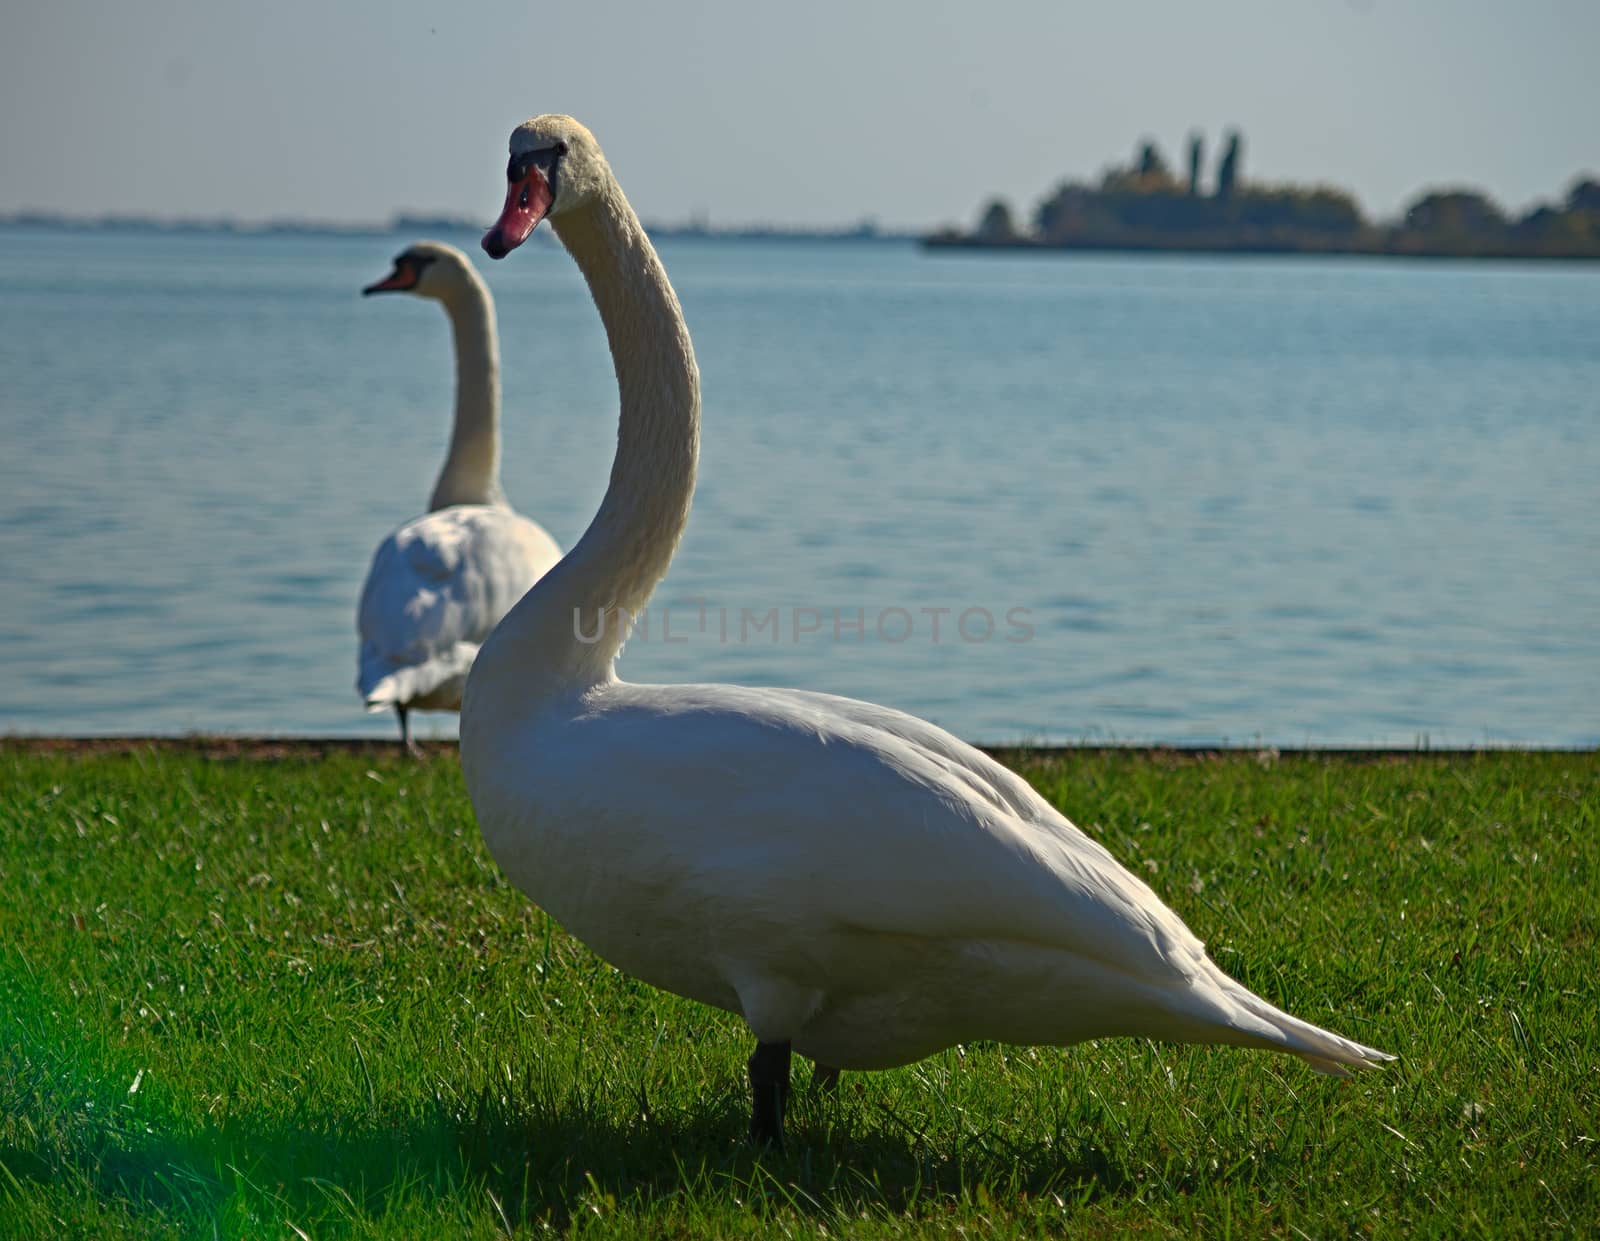 White swan standing on grass field with lake in background by sheriffkule